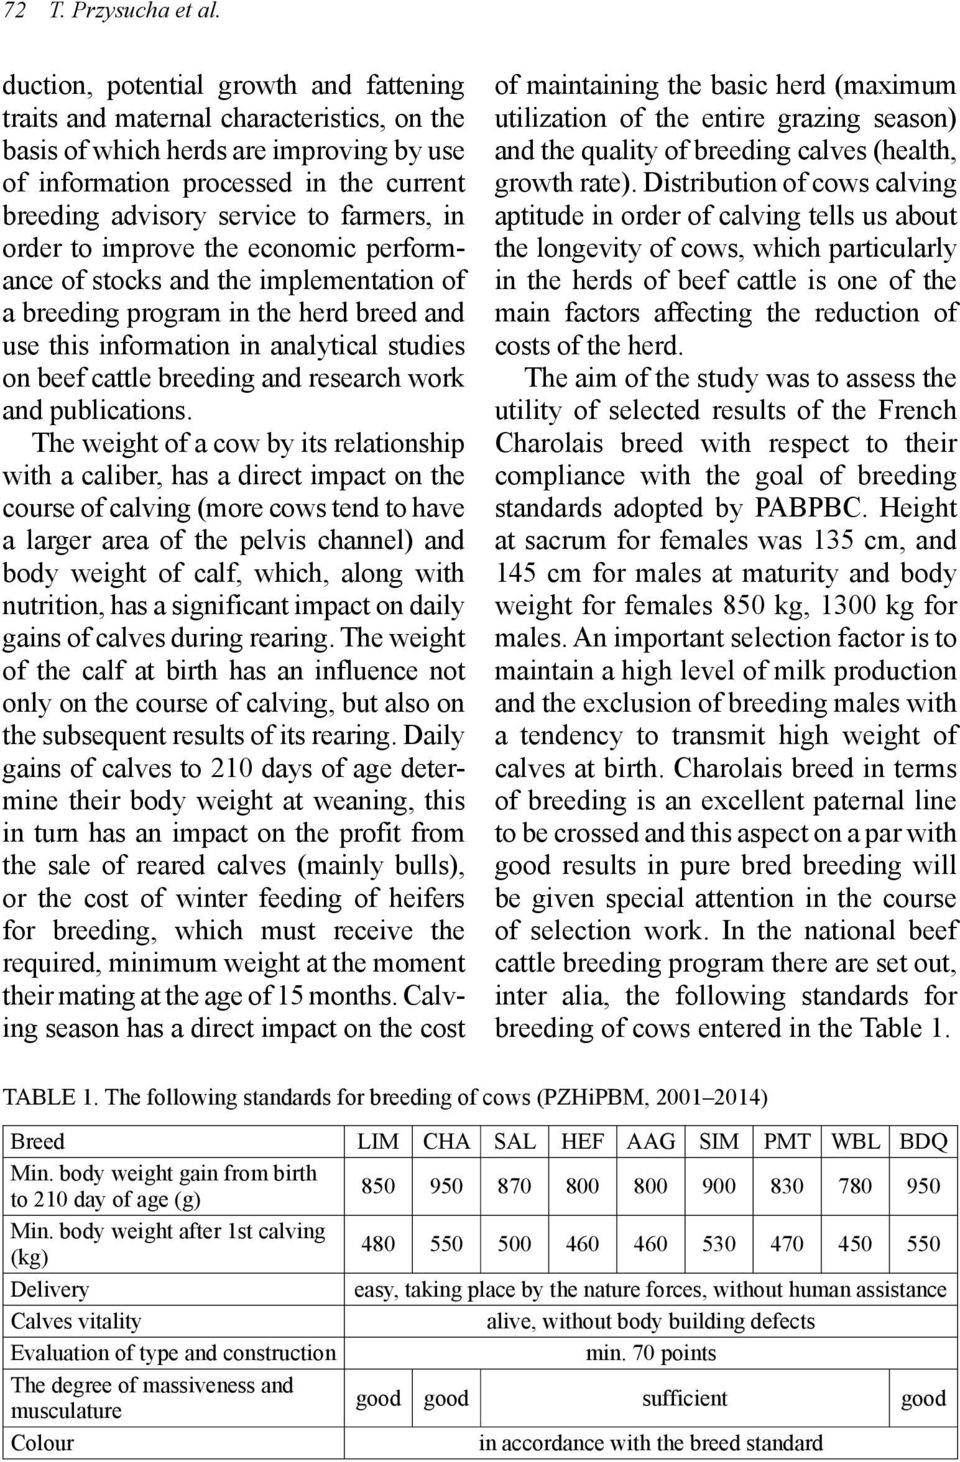 farmers, in order to improve the economic performance of stocks and the implementation of a breeding program in the herd breed and use this information in analytical studies on beef cattle breeding